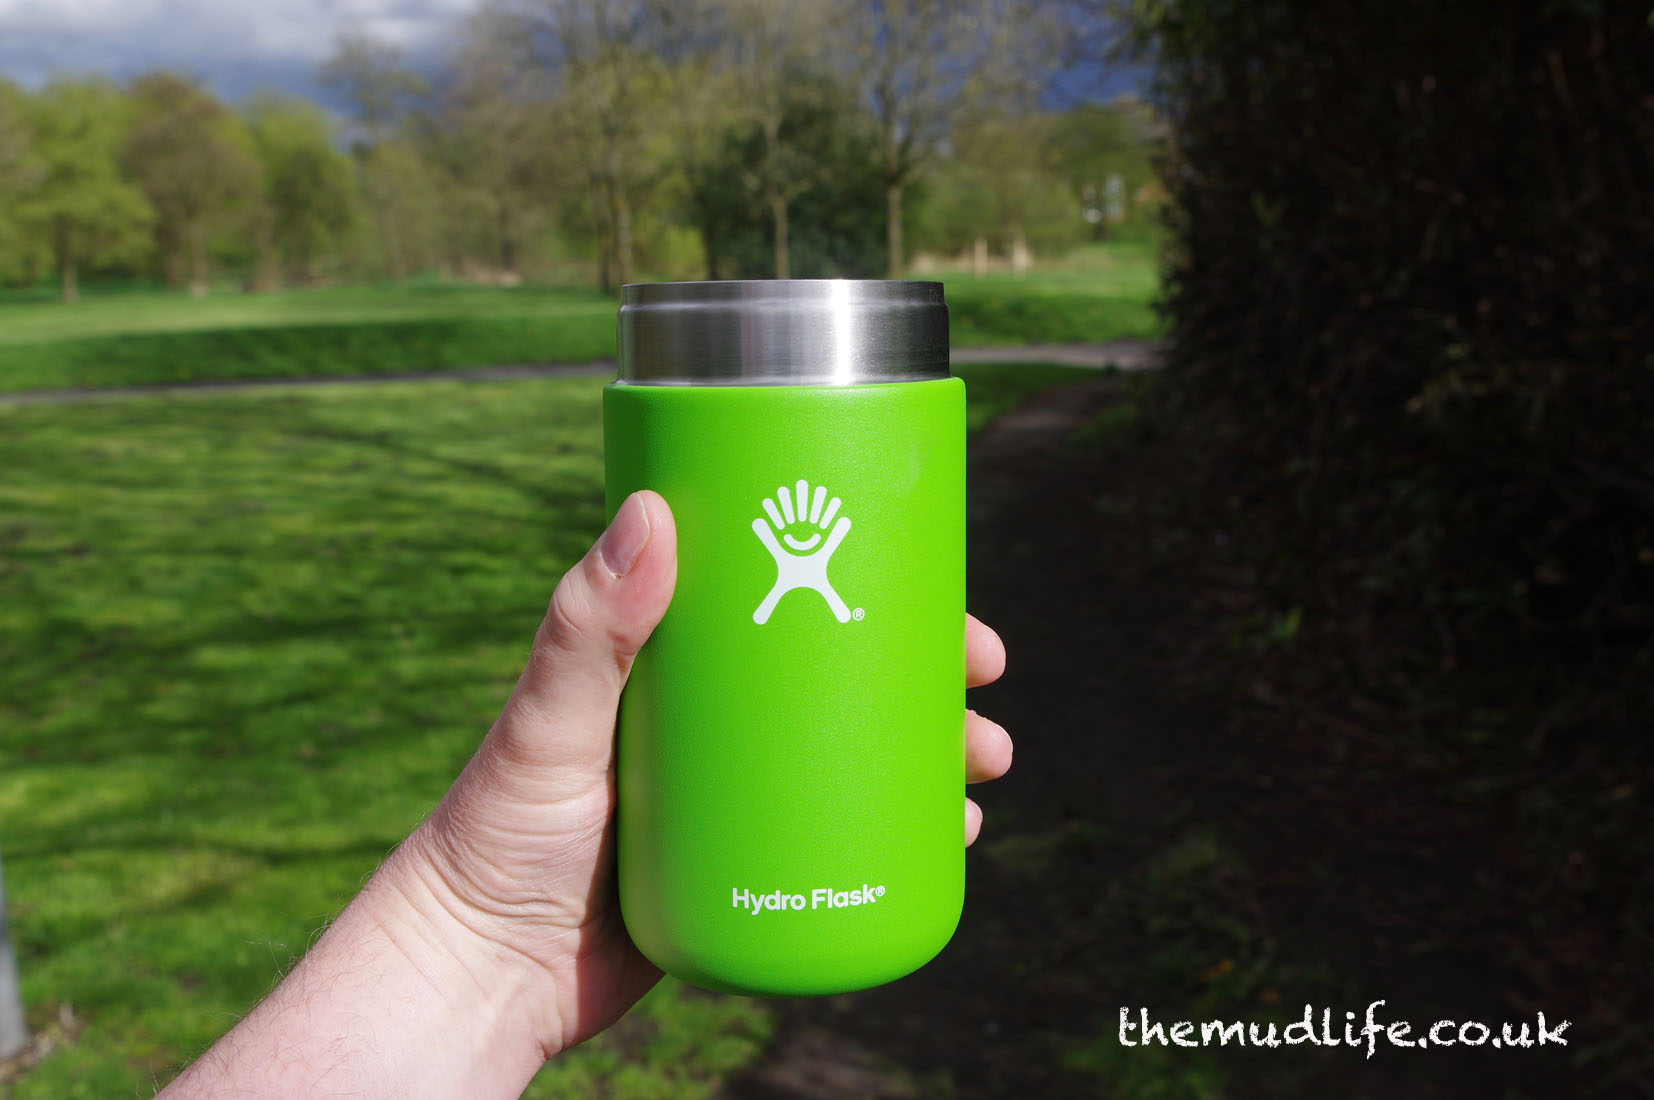 Hydro Flask Insulated Food Flask — The 